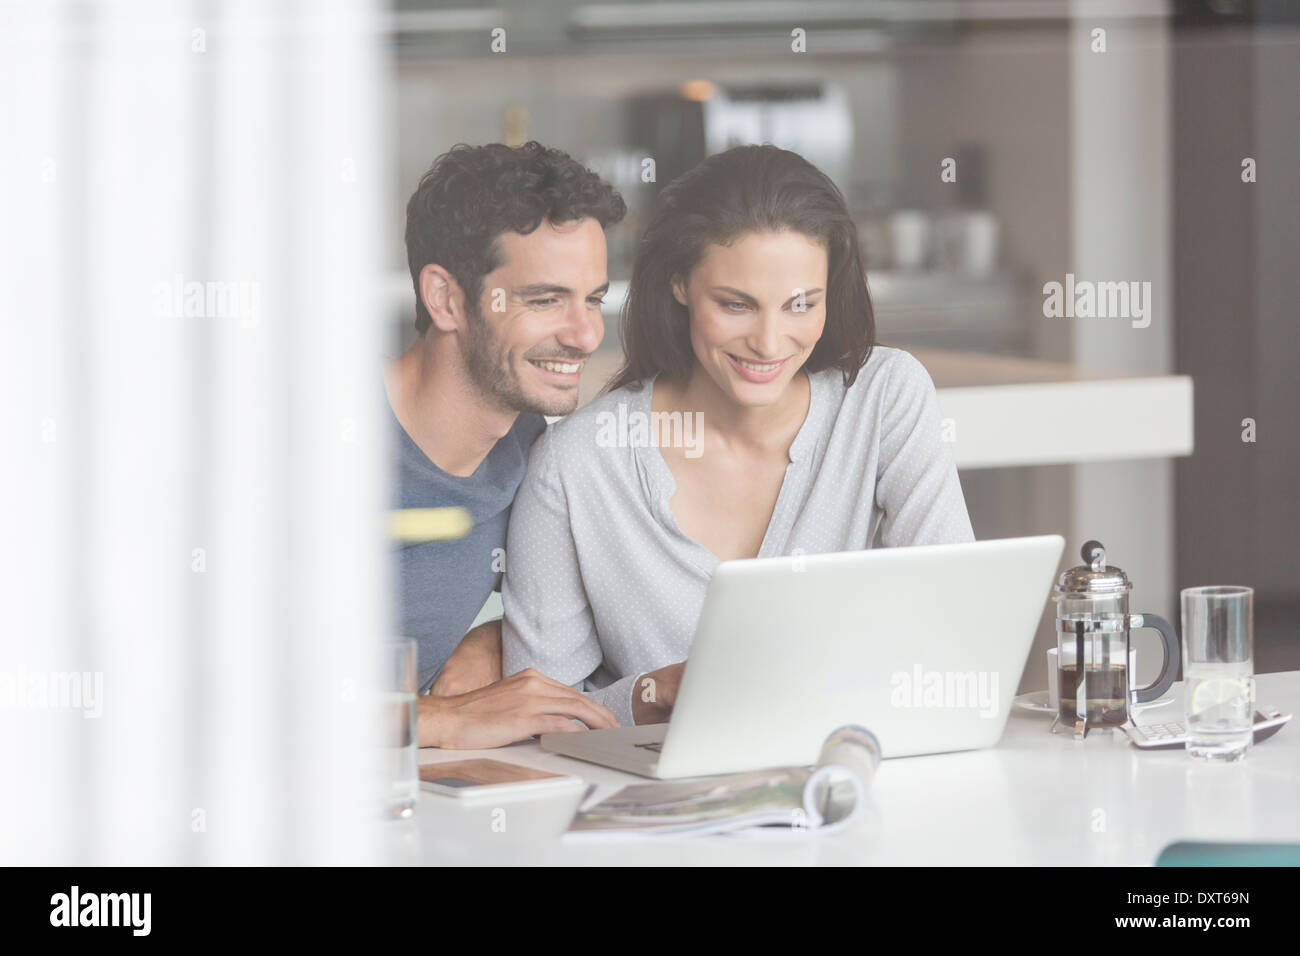 Couple using laptop at table Stock Photo